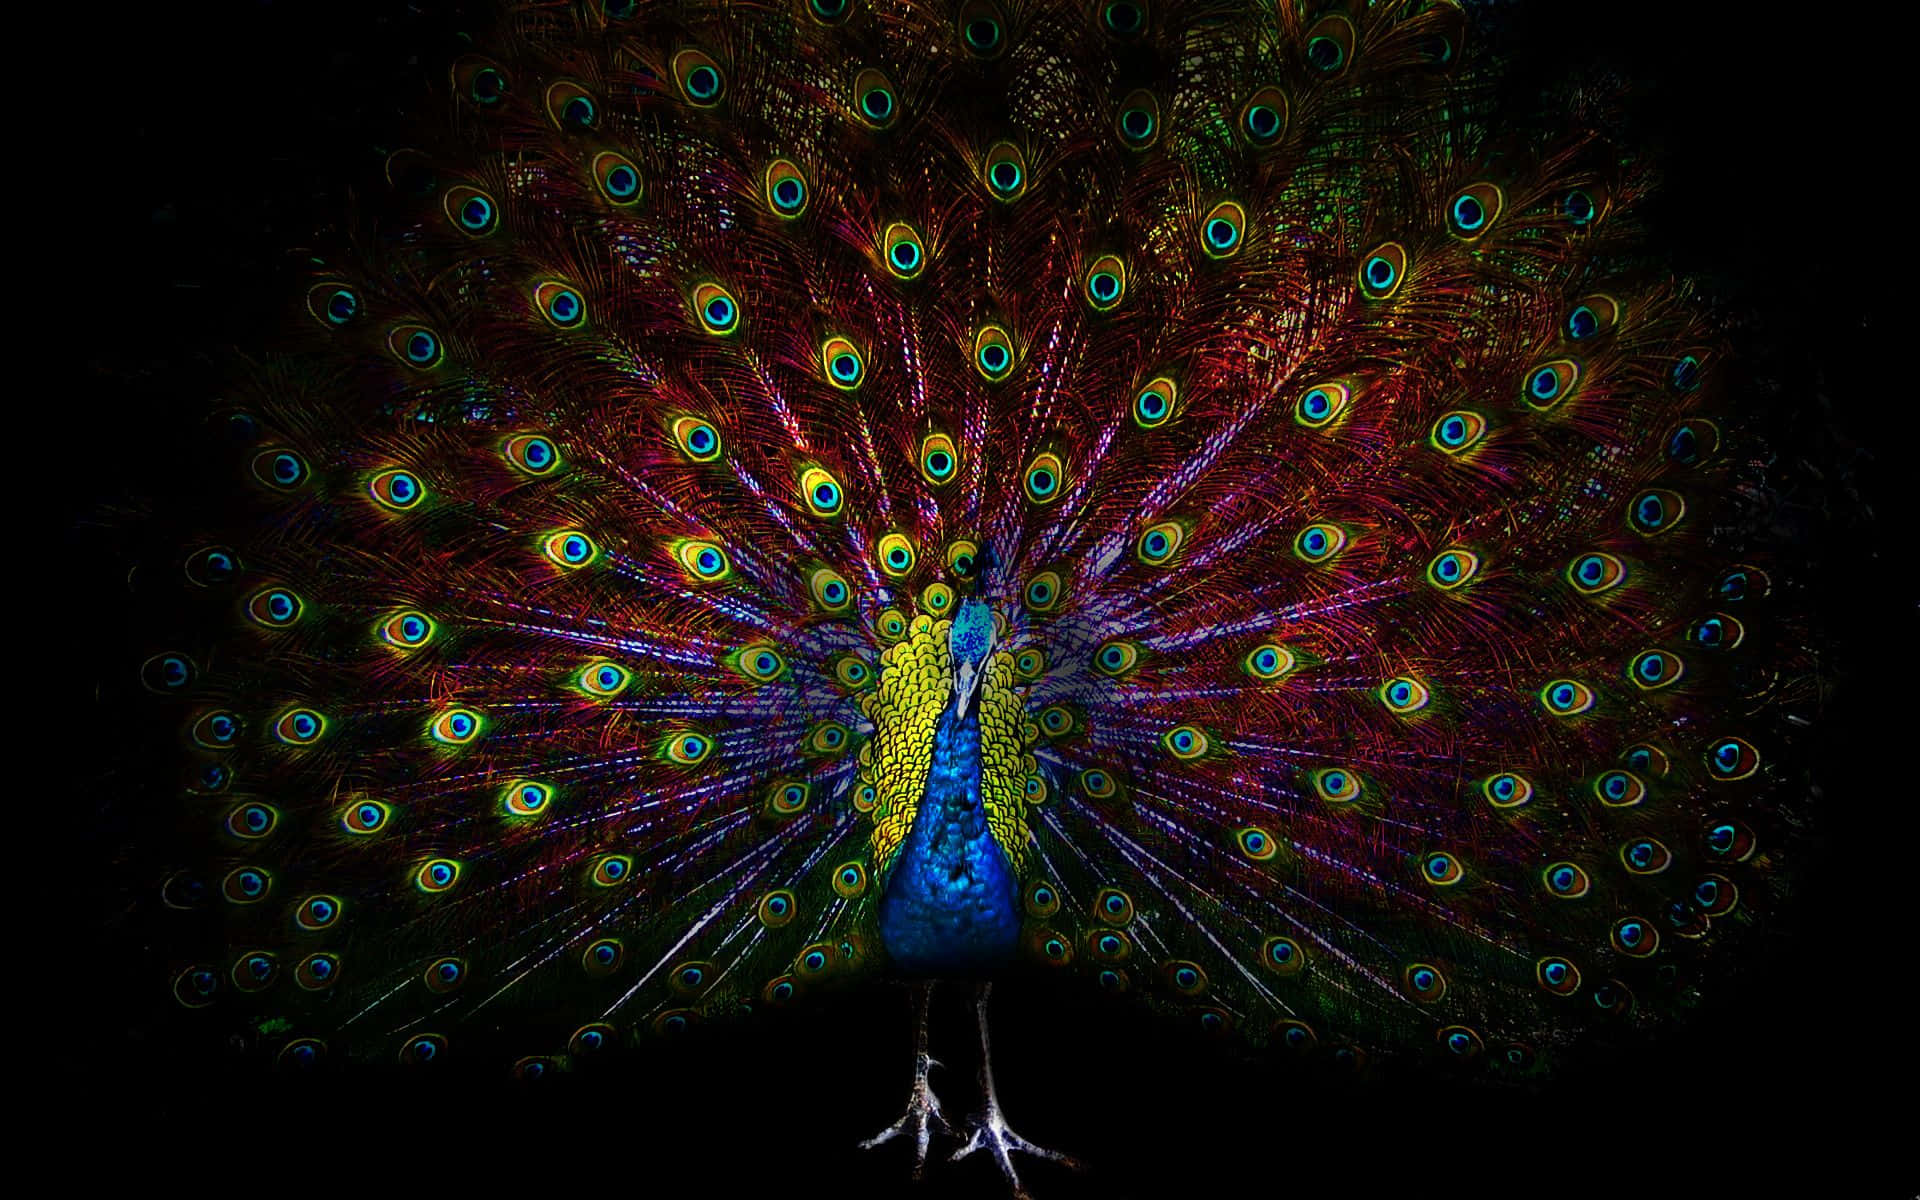 A majestic peacock spreads its colorful feathers